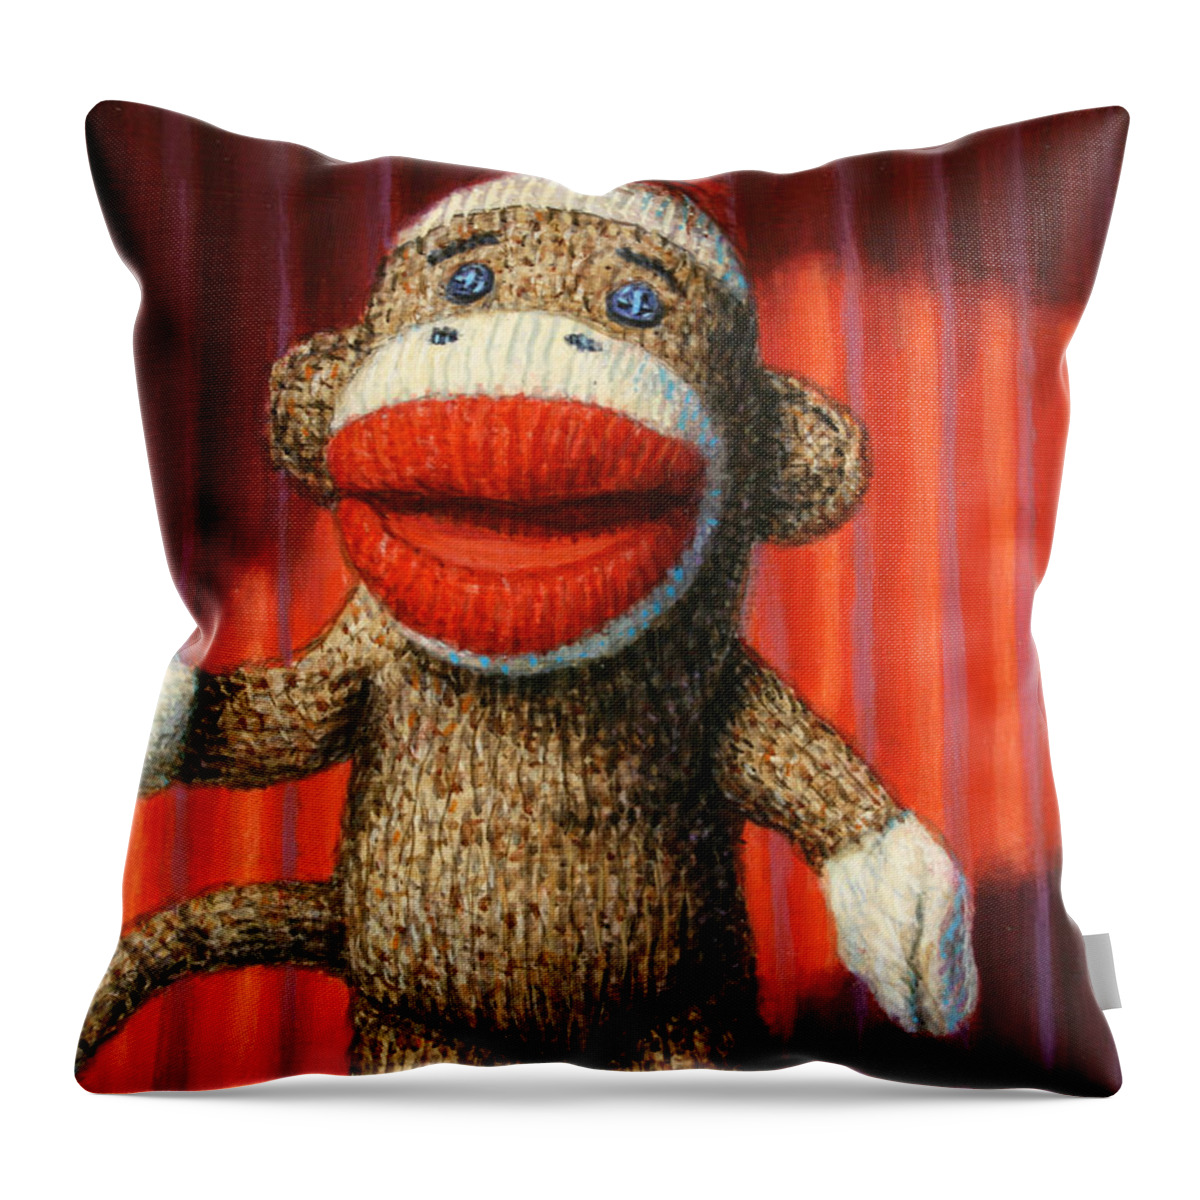 Sock Monkey Throw Pillow featuring the painting Performing Sock Monkey by James W Johnson